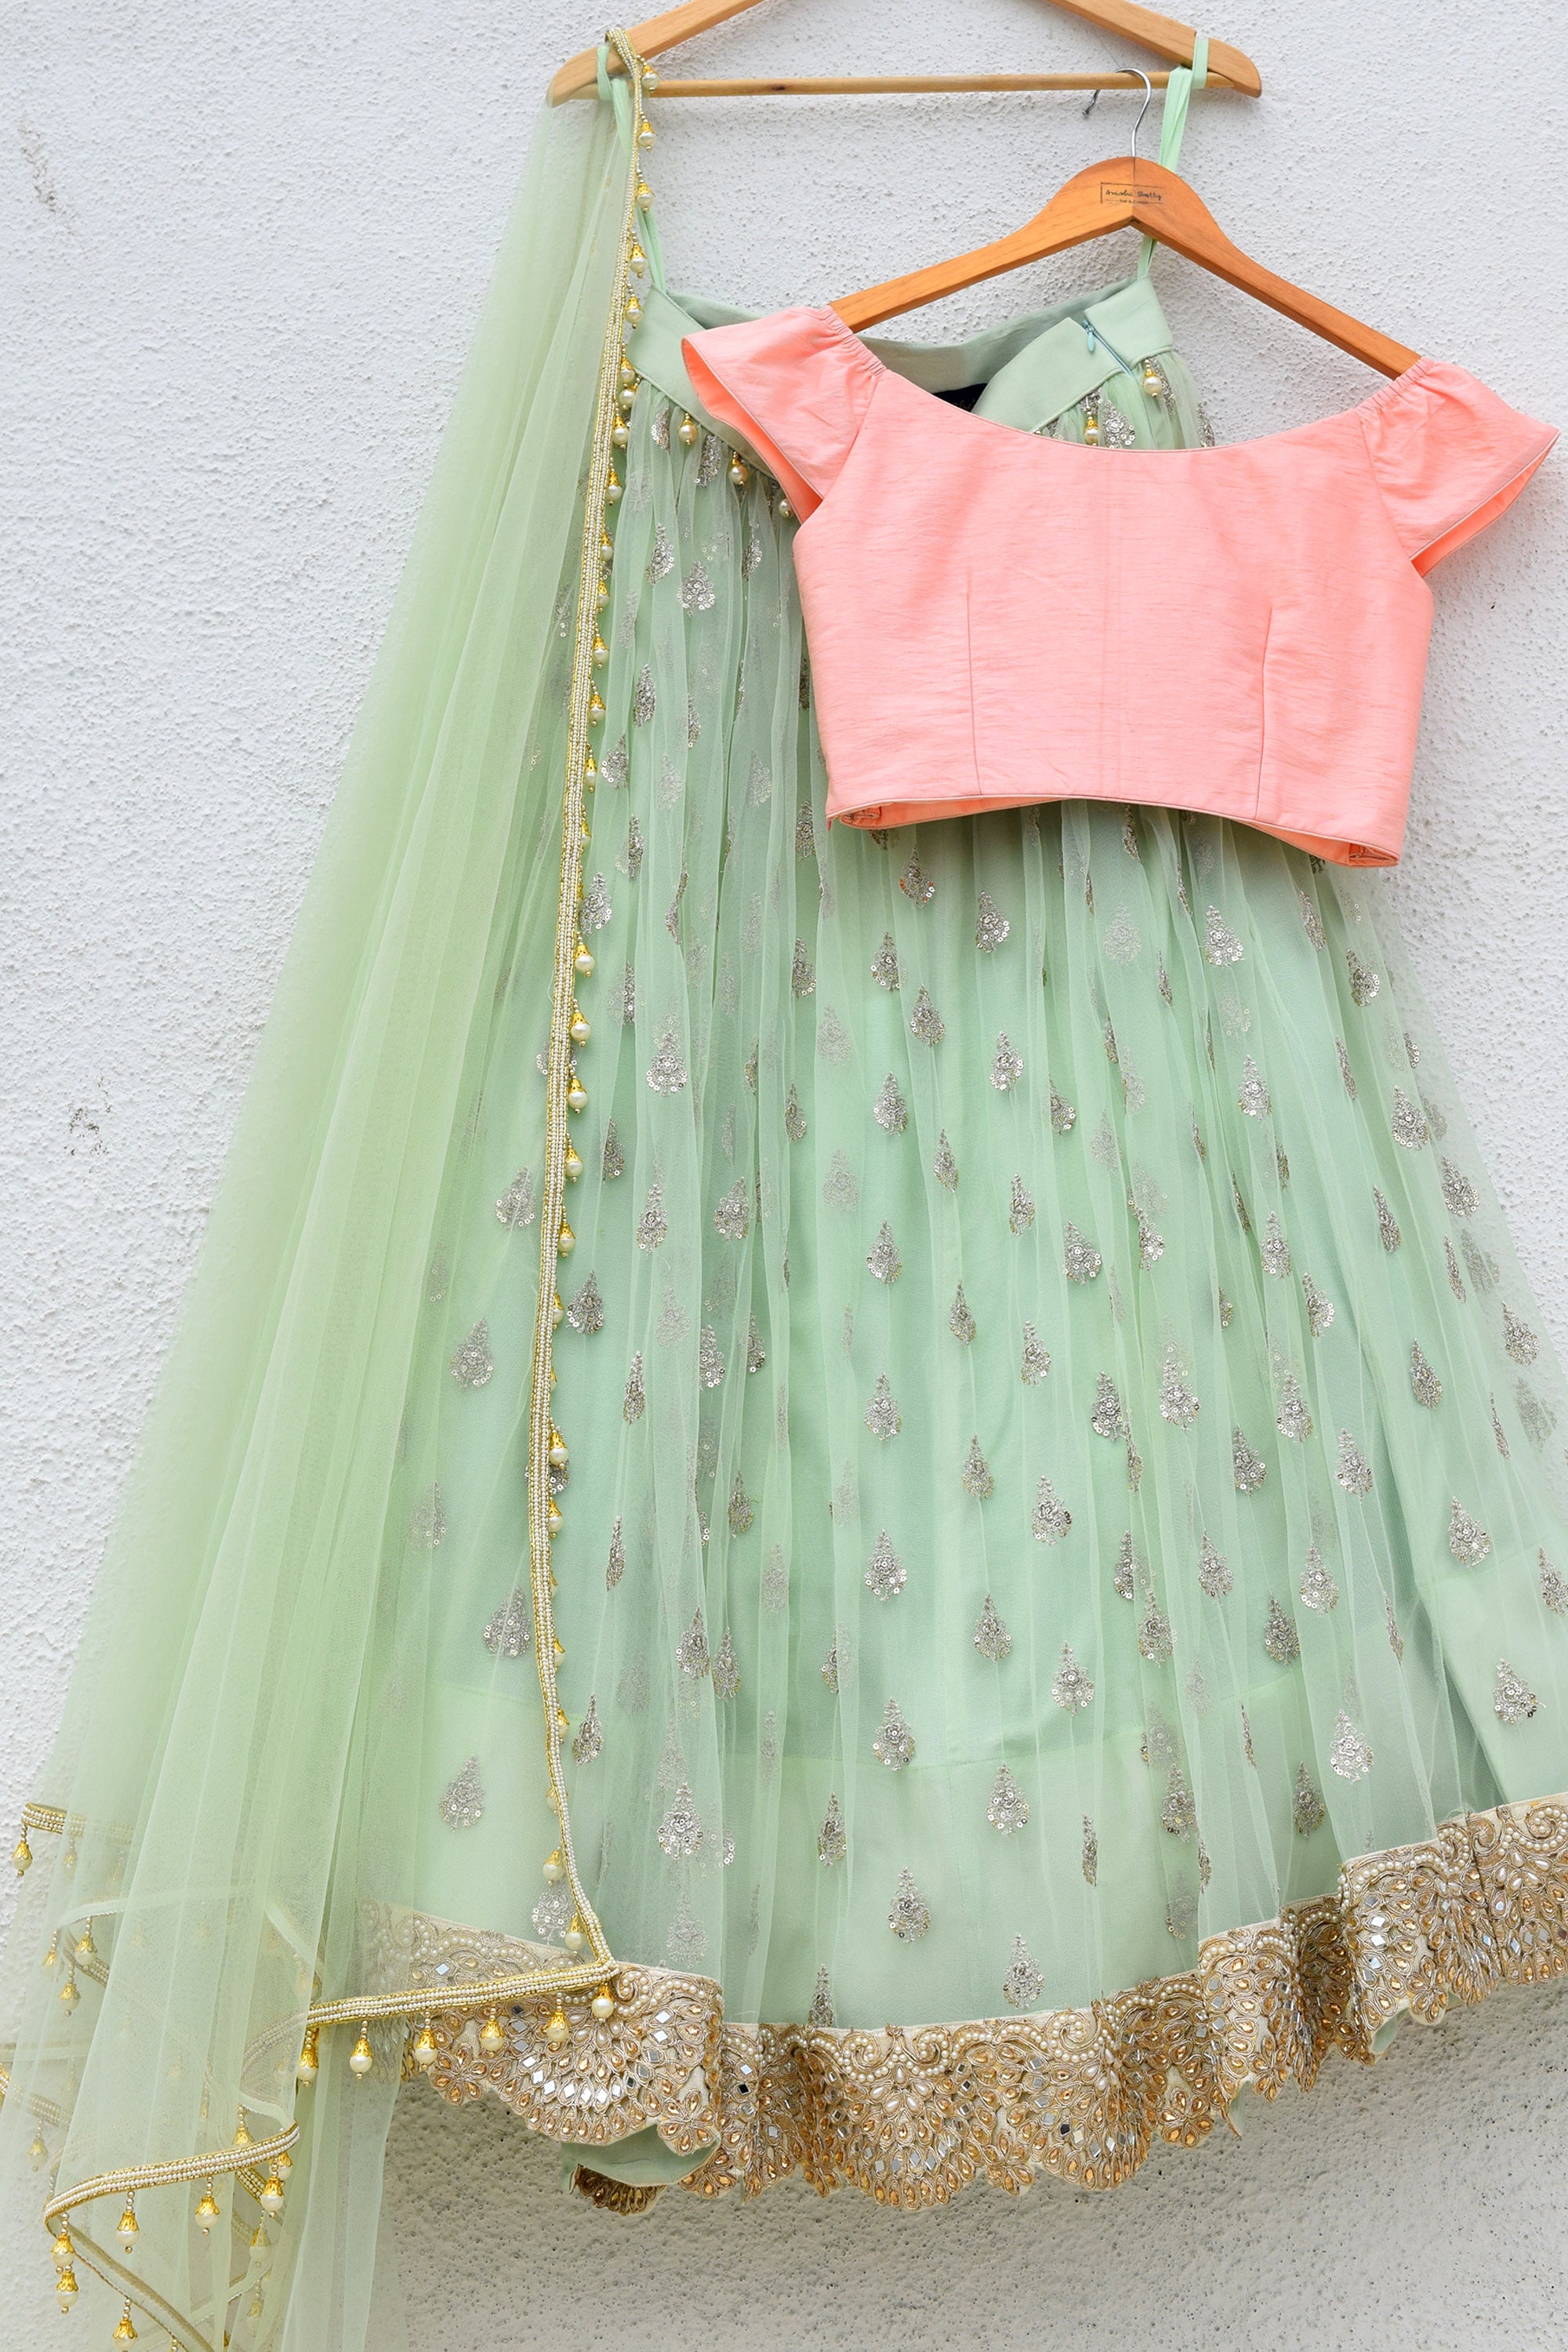 mint green and pink dress